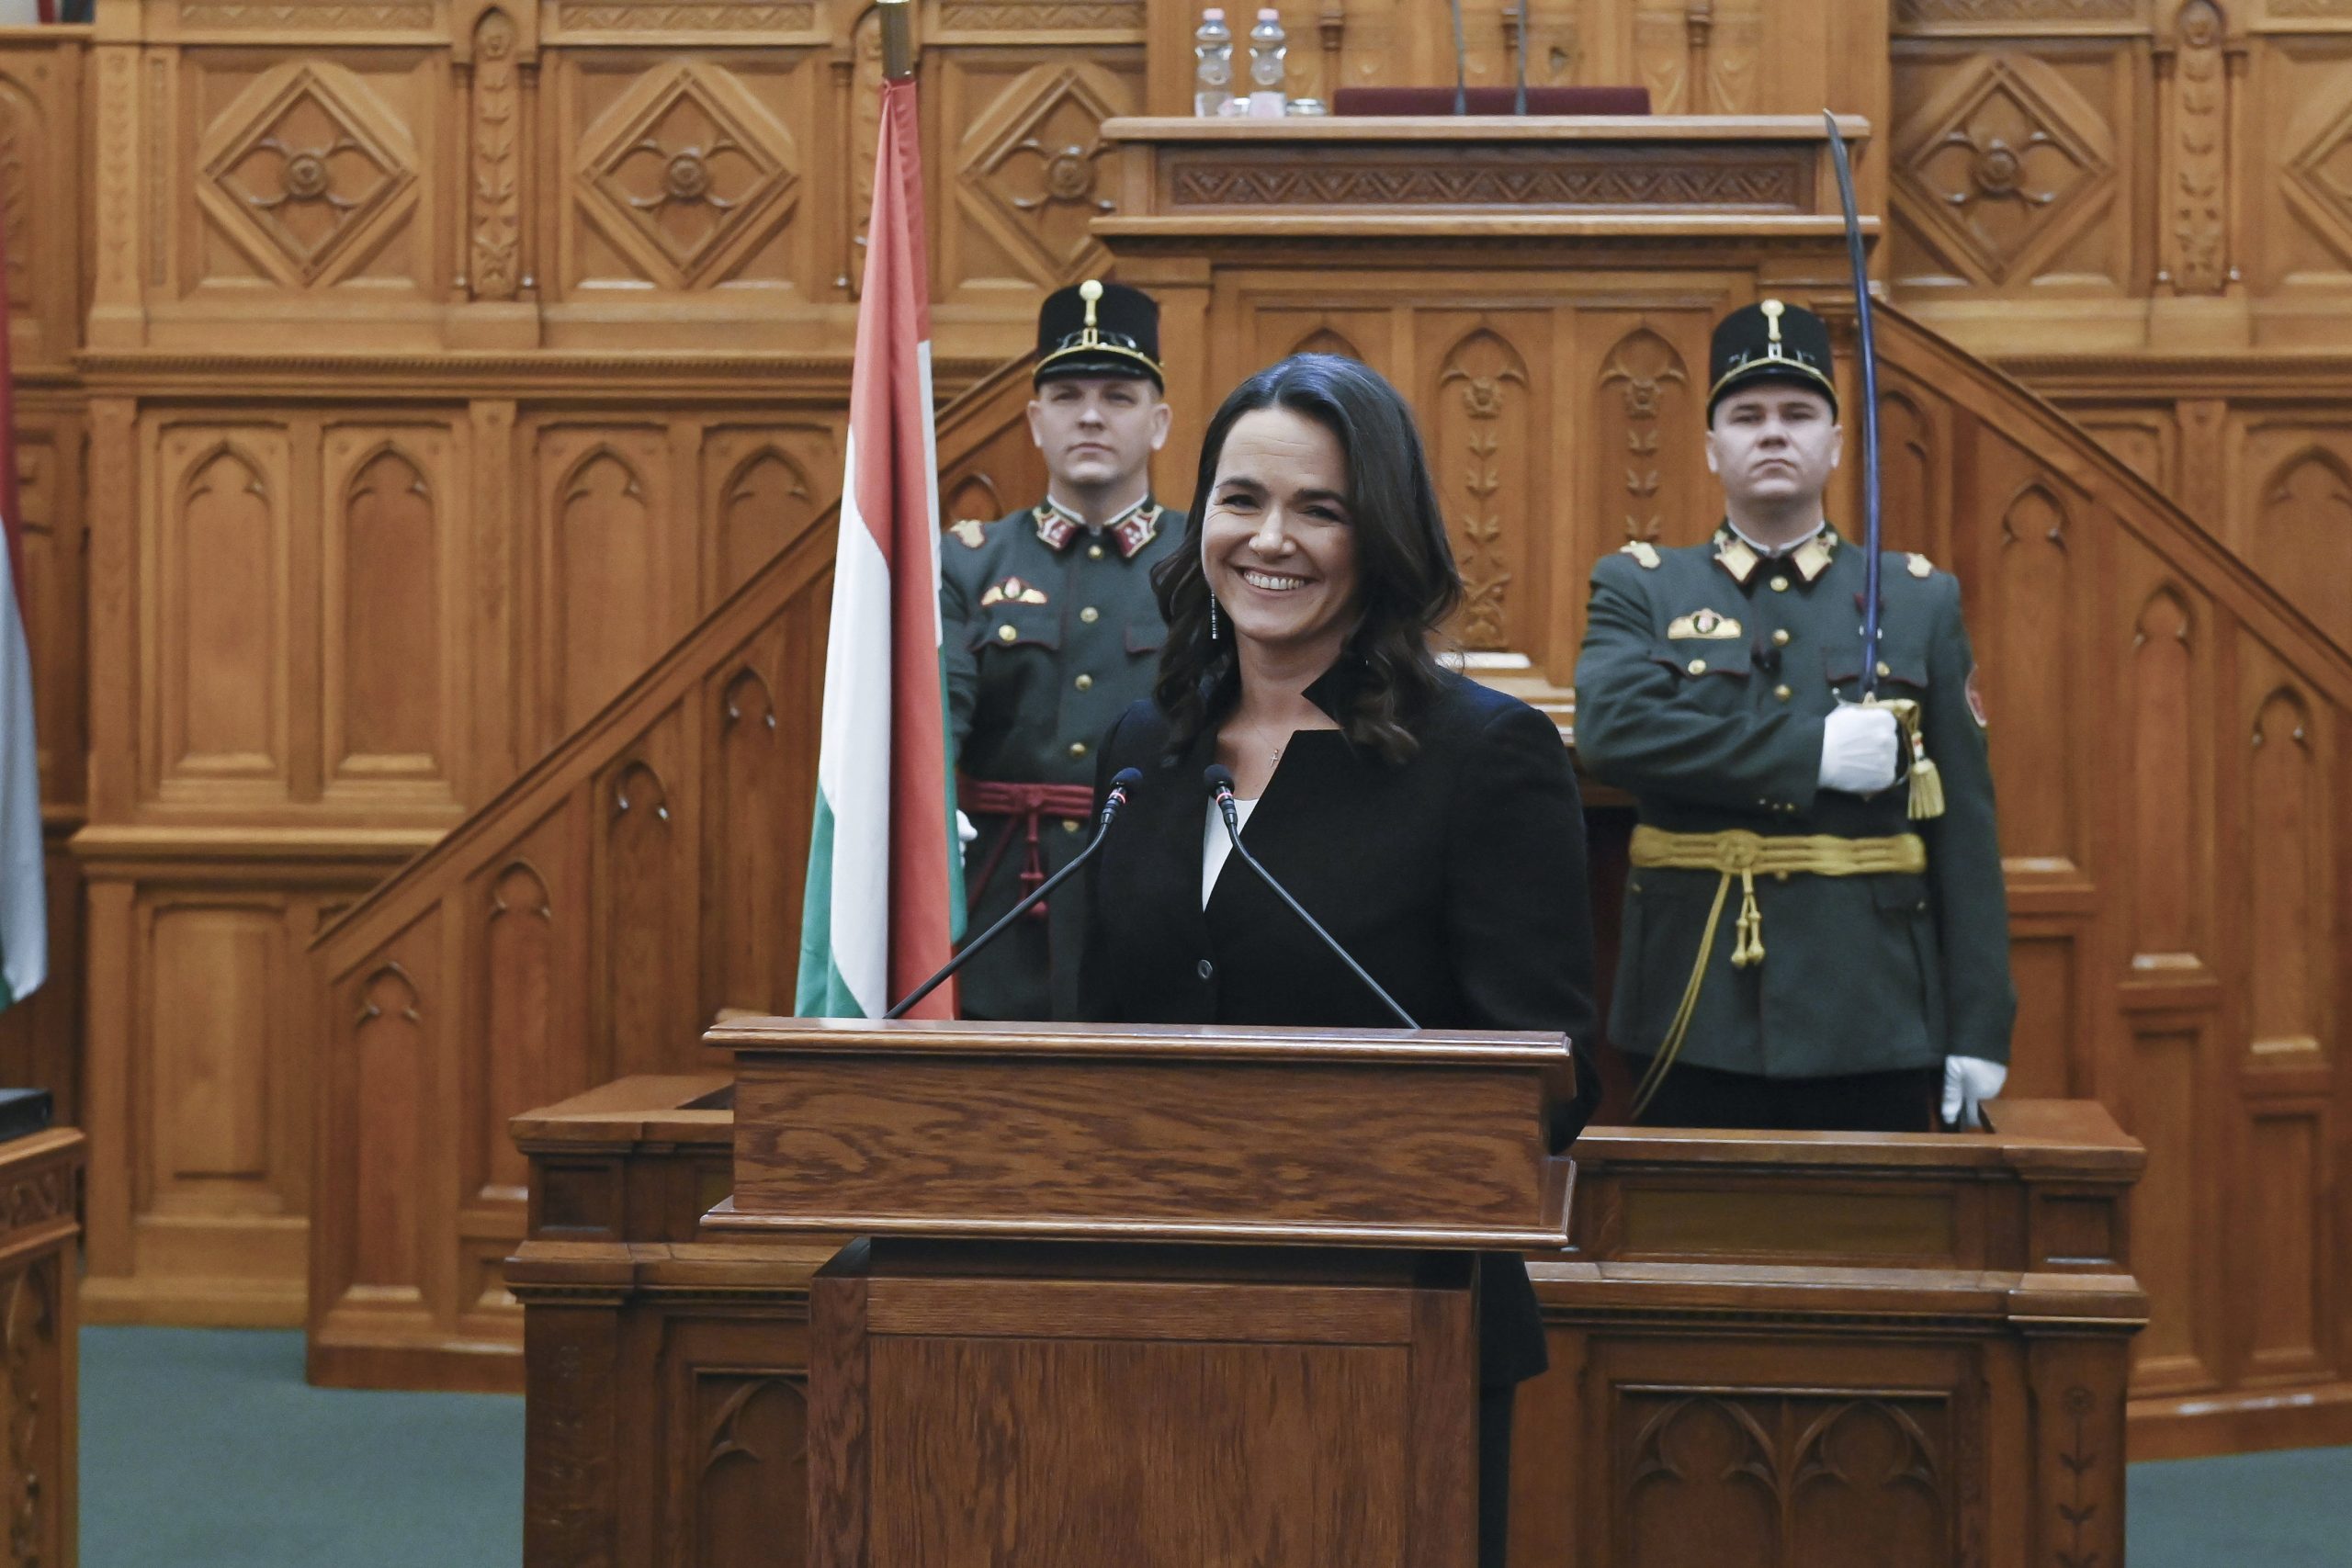 Hungary's First Female Head of State Elected - Hungary Today